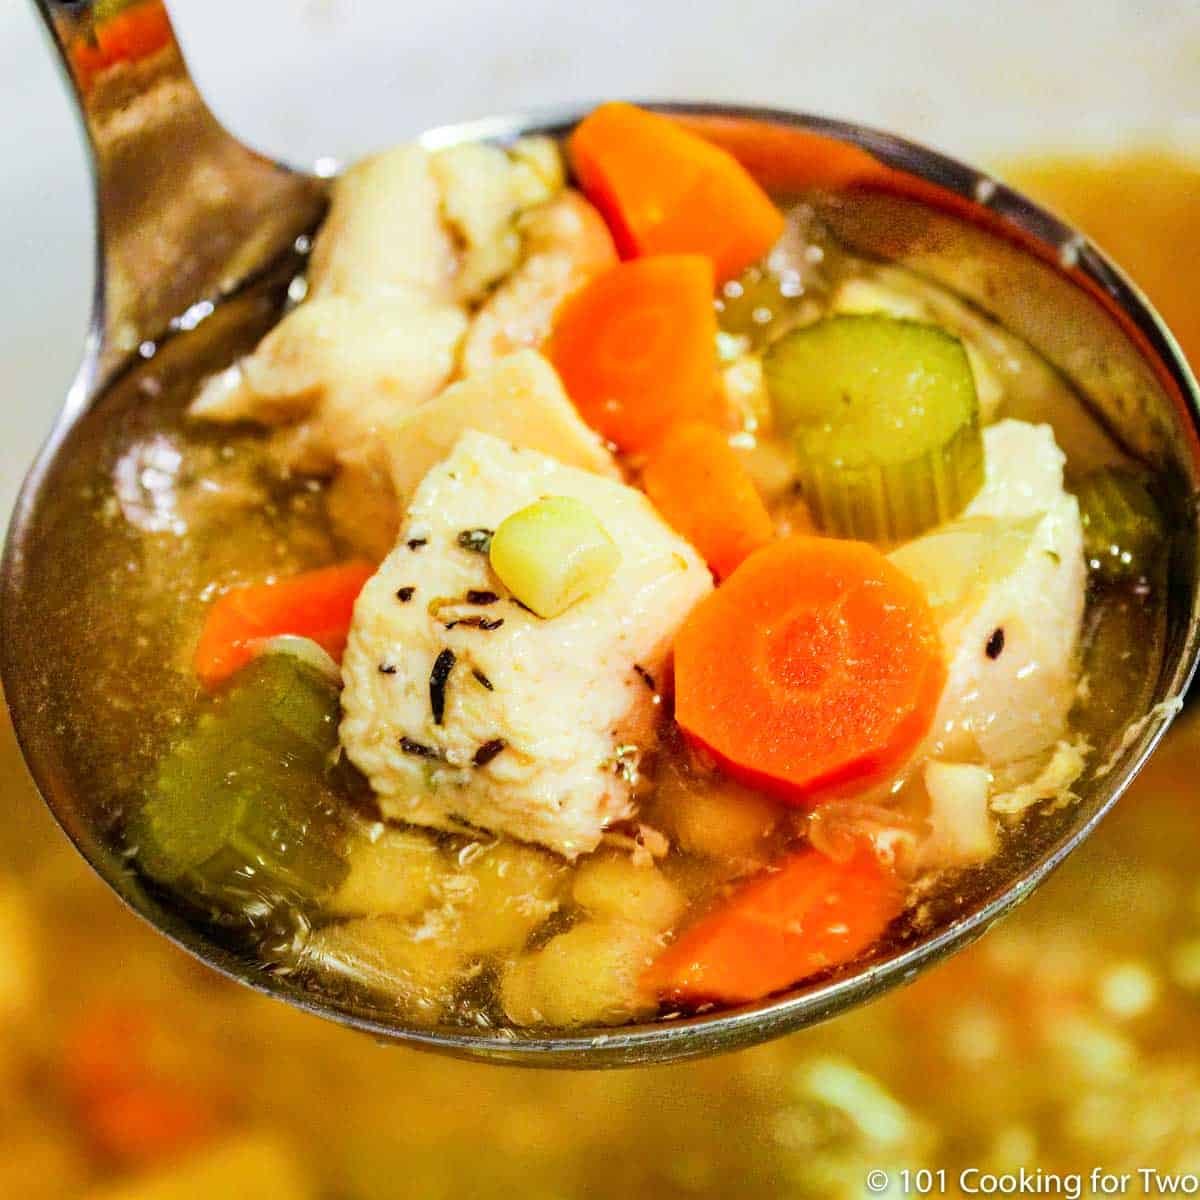 ladel of chicken vegetable soup